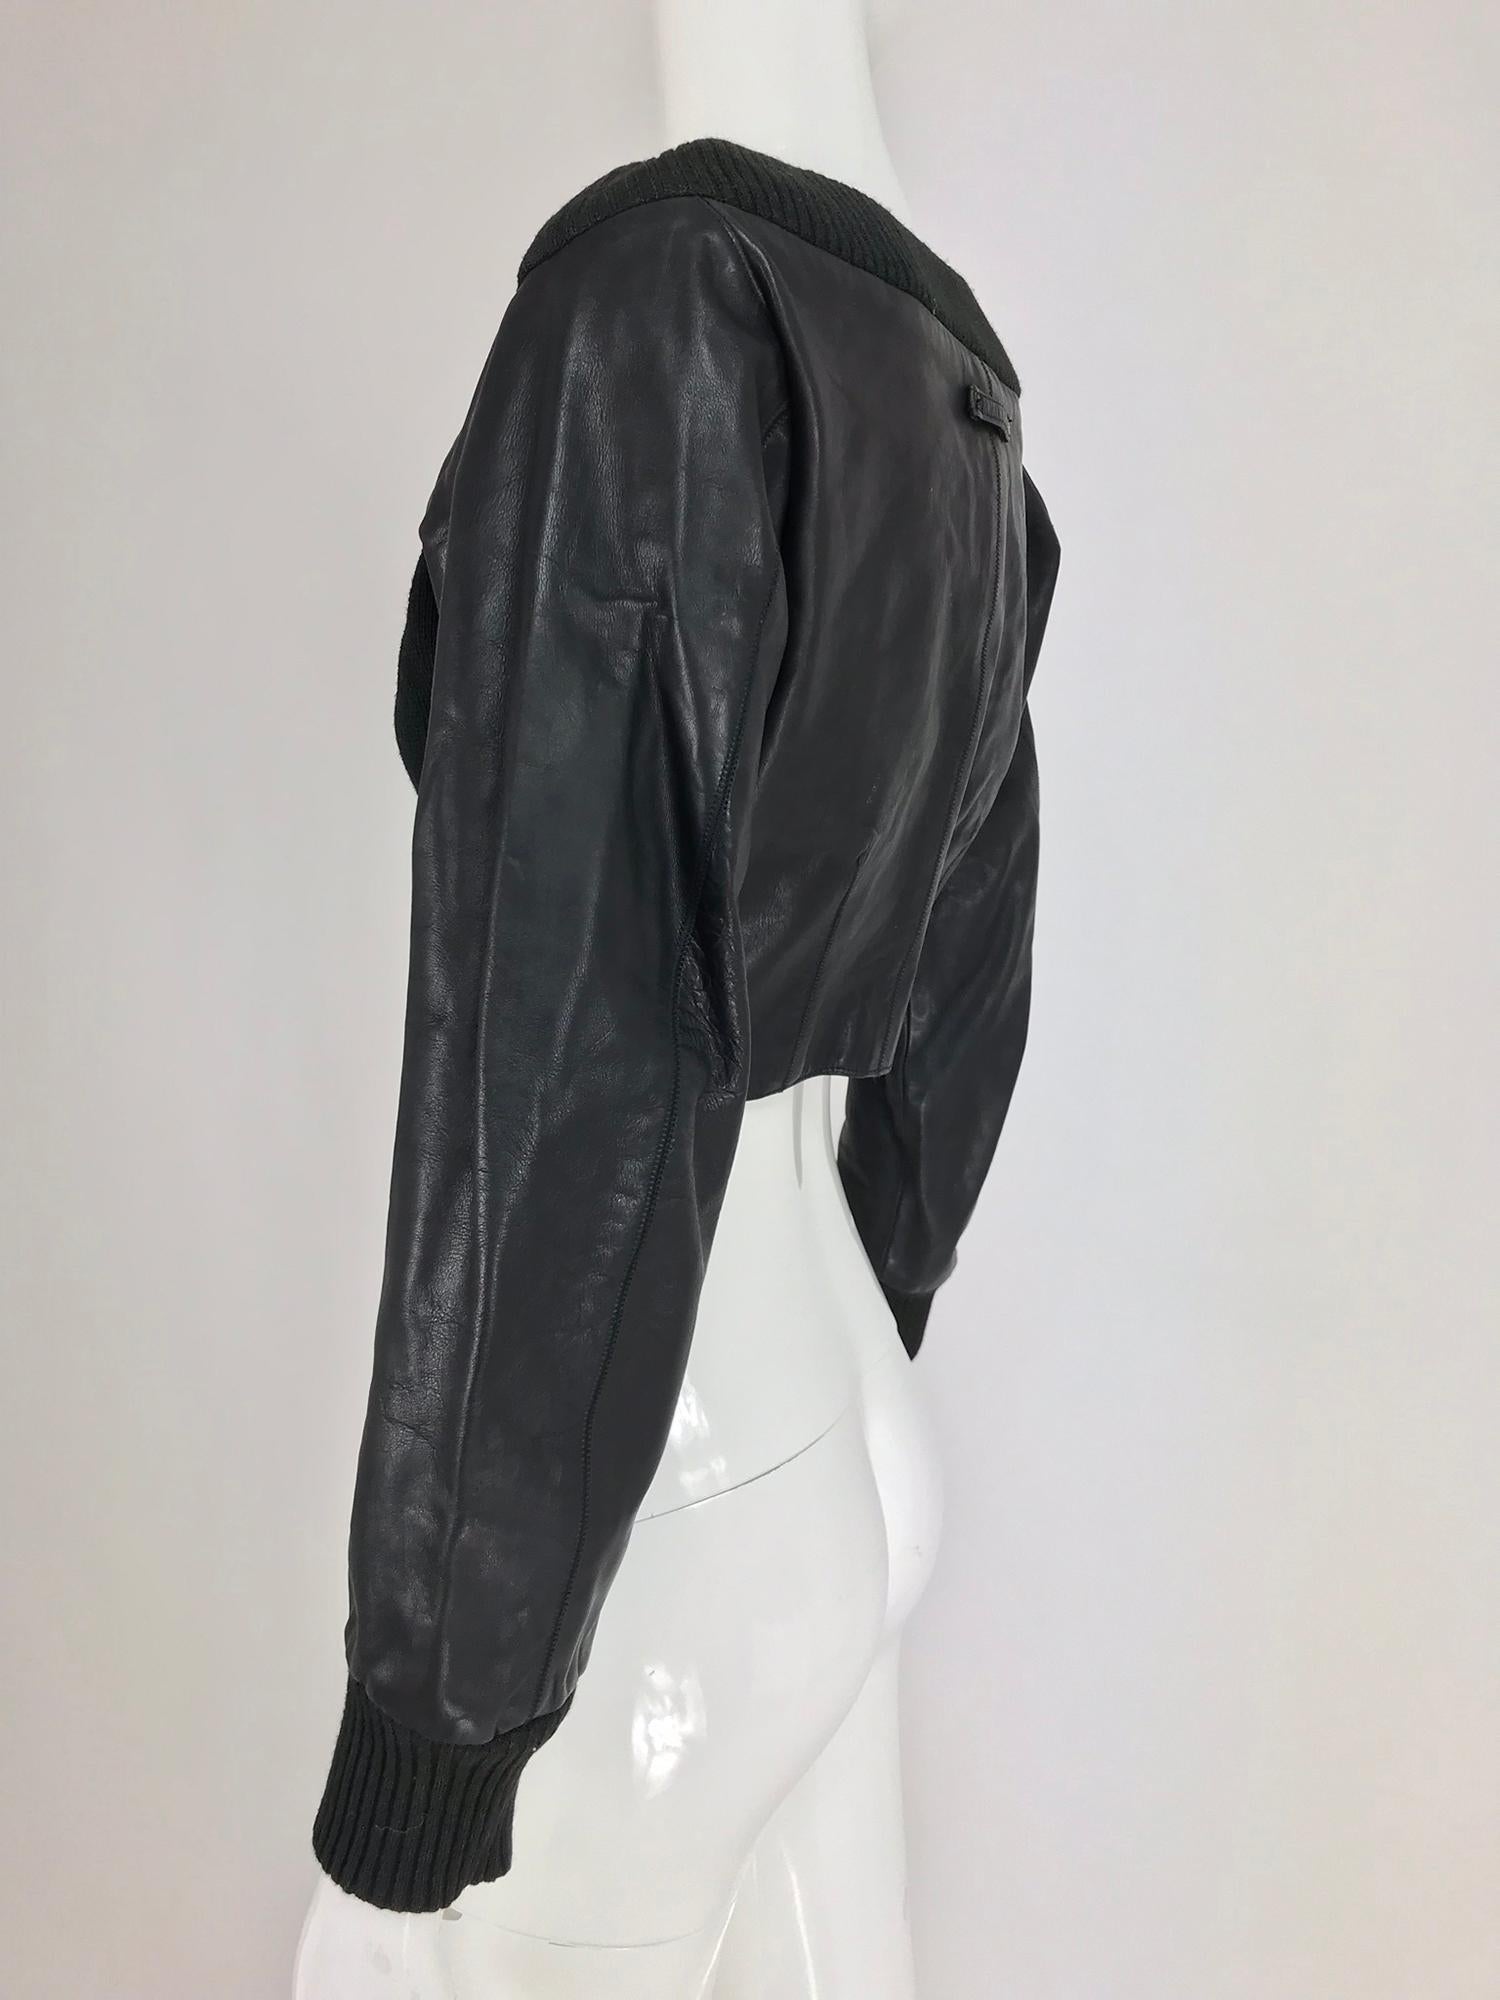 Jean Paul Gaultier black leather and Knit Off the Shoulder Jacket 1990s 3